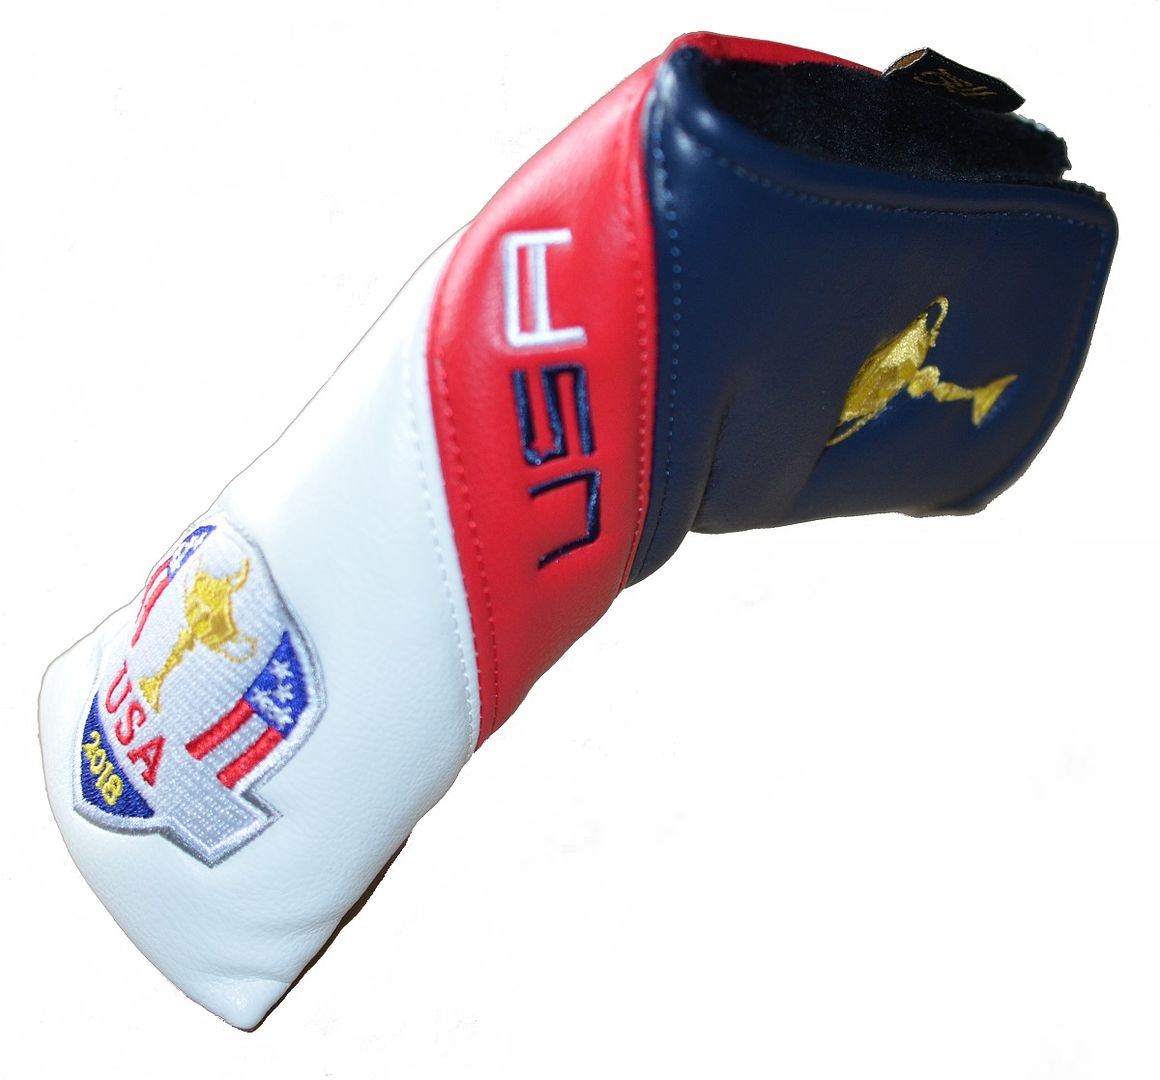 2018 RYDER CUP (Le Golf National) PRG 12 Strong Limited Edition PUTTER COVER eBay